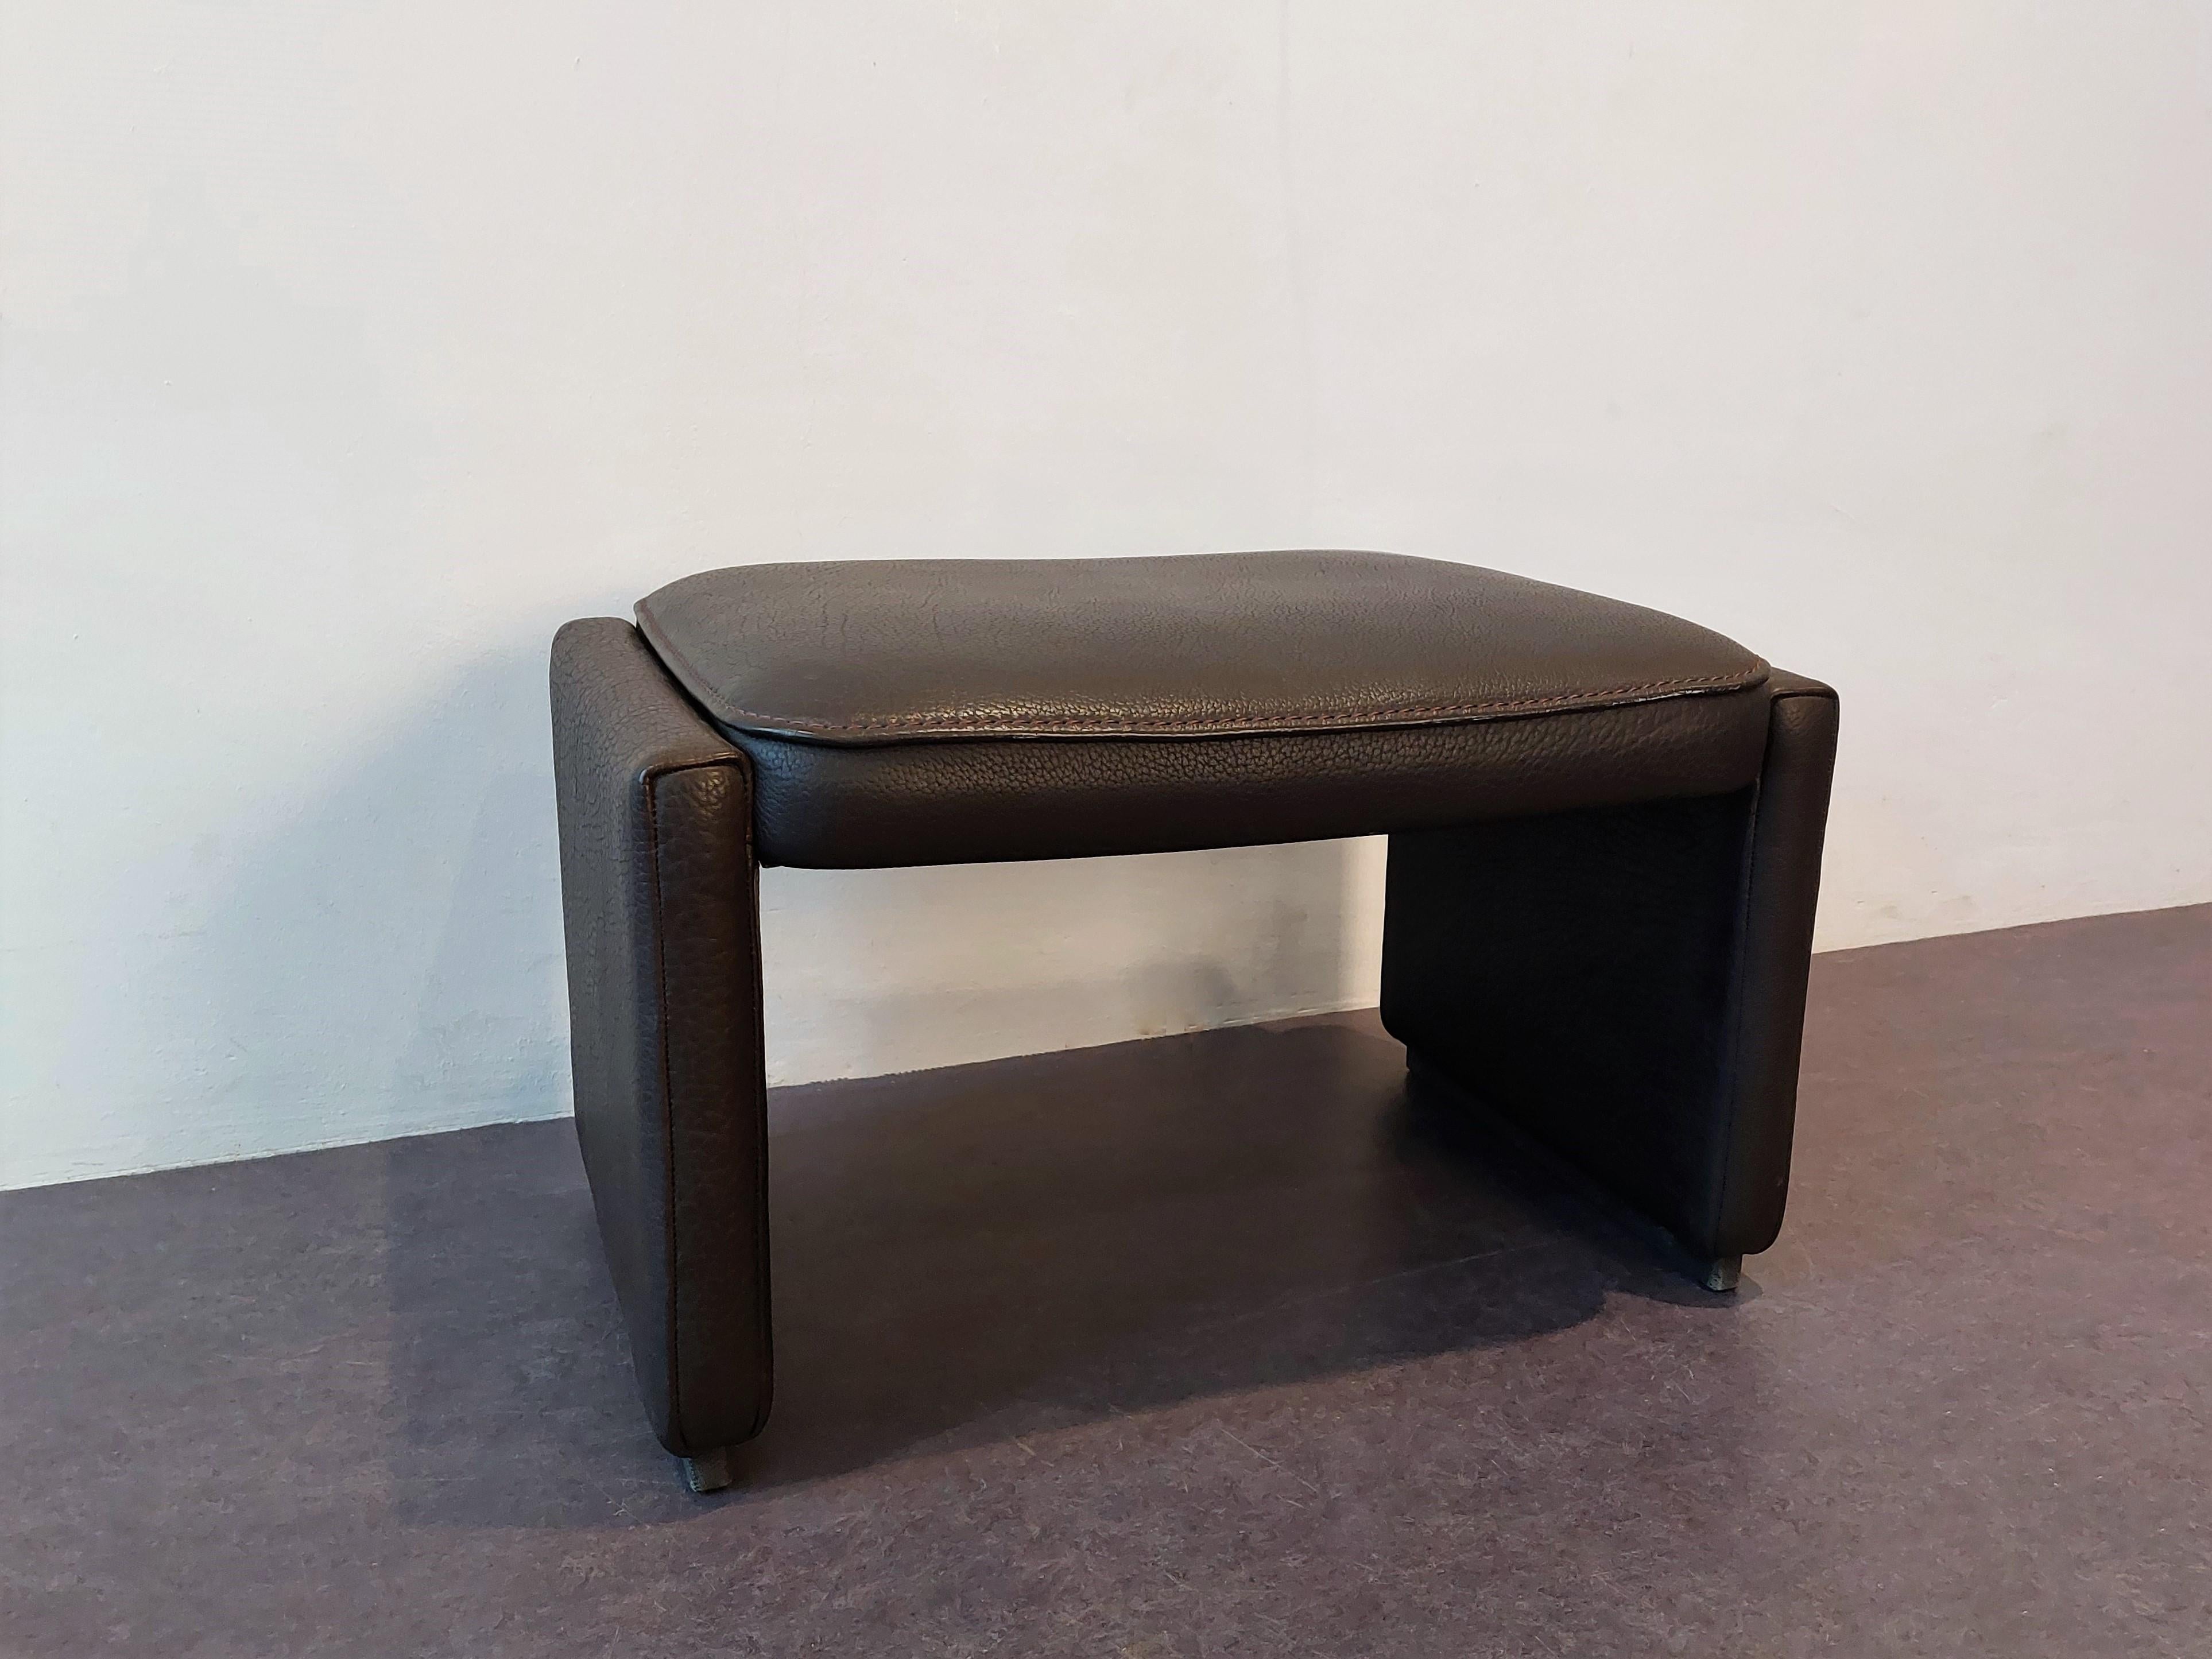 This DS-50 ottoman was made by De Sede in the 1970's. It is made out of thick neck leather of the highest quality in a warm dark brown colour. This ottoman is in a very good condition and was hardly ever used by the previous and first owner.